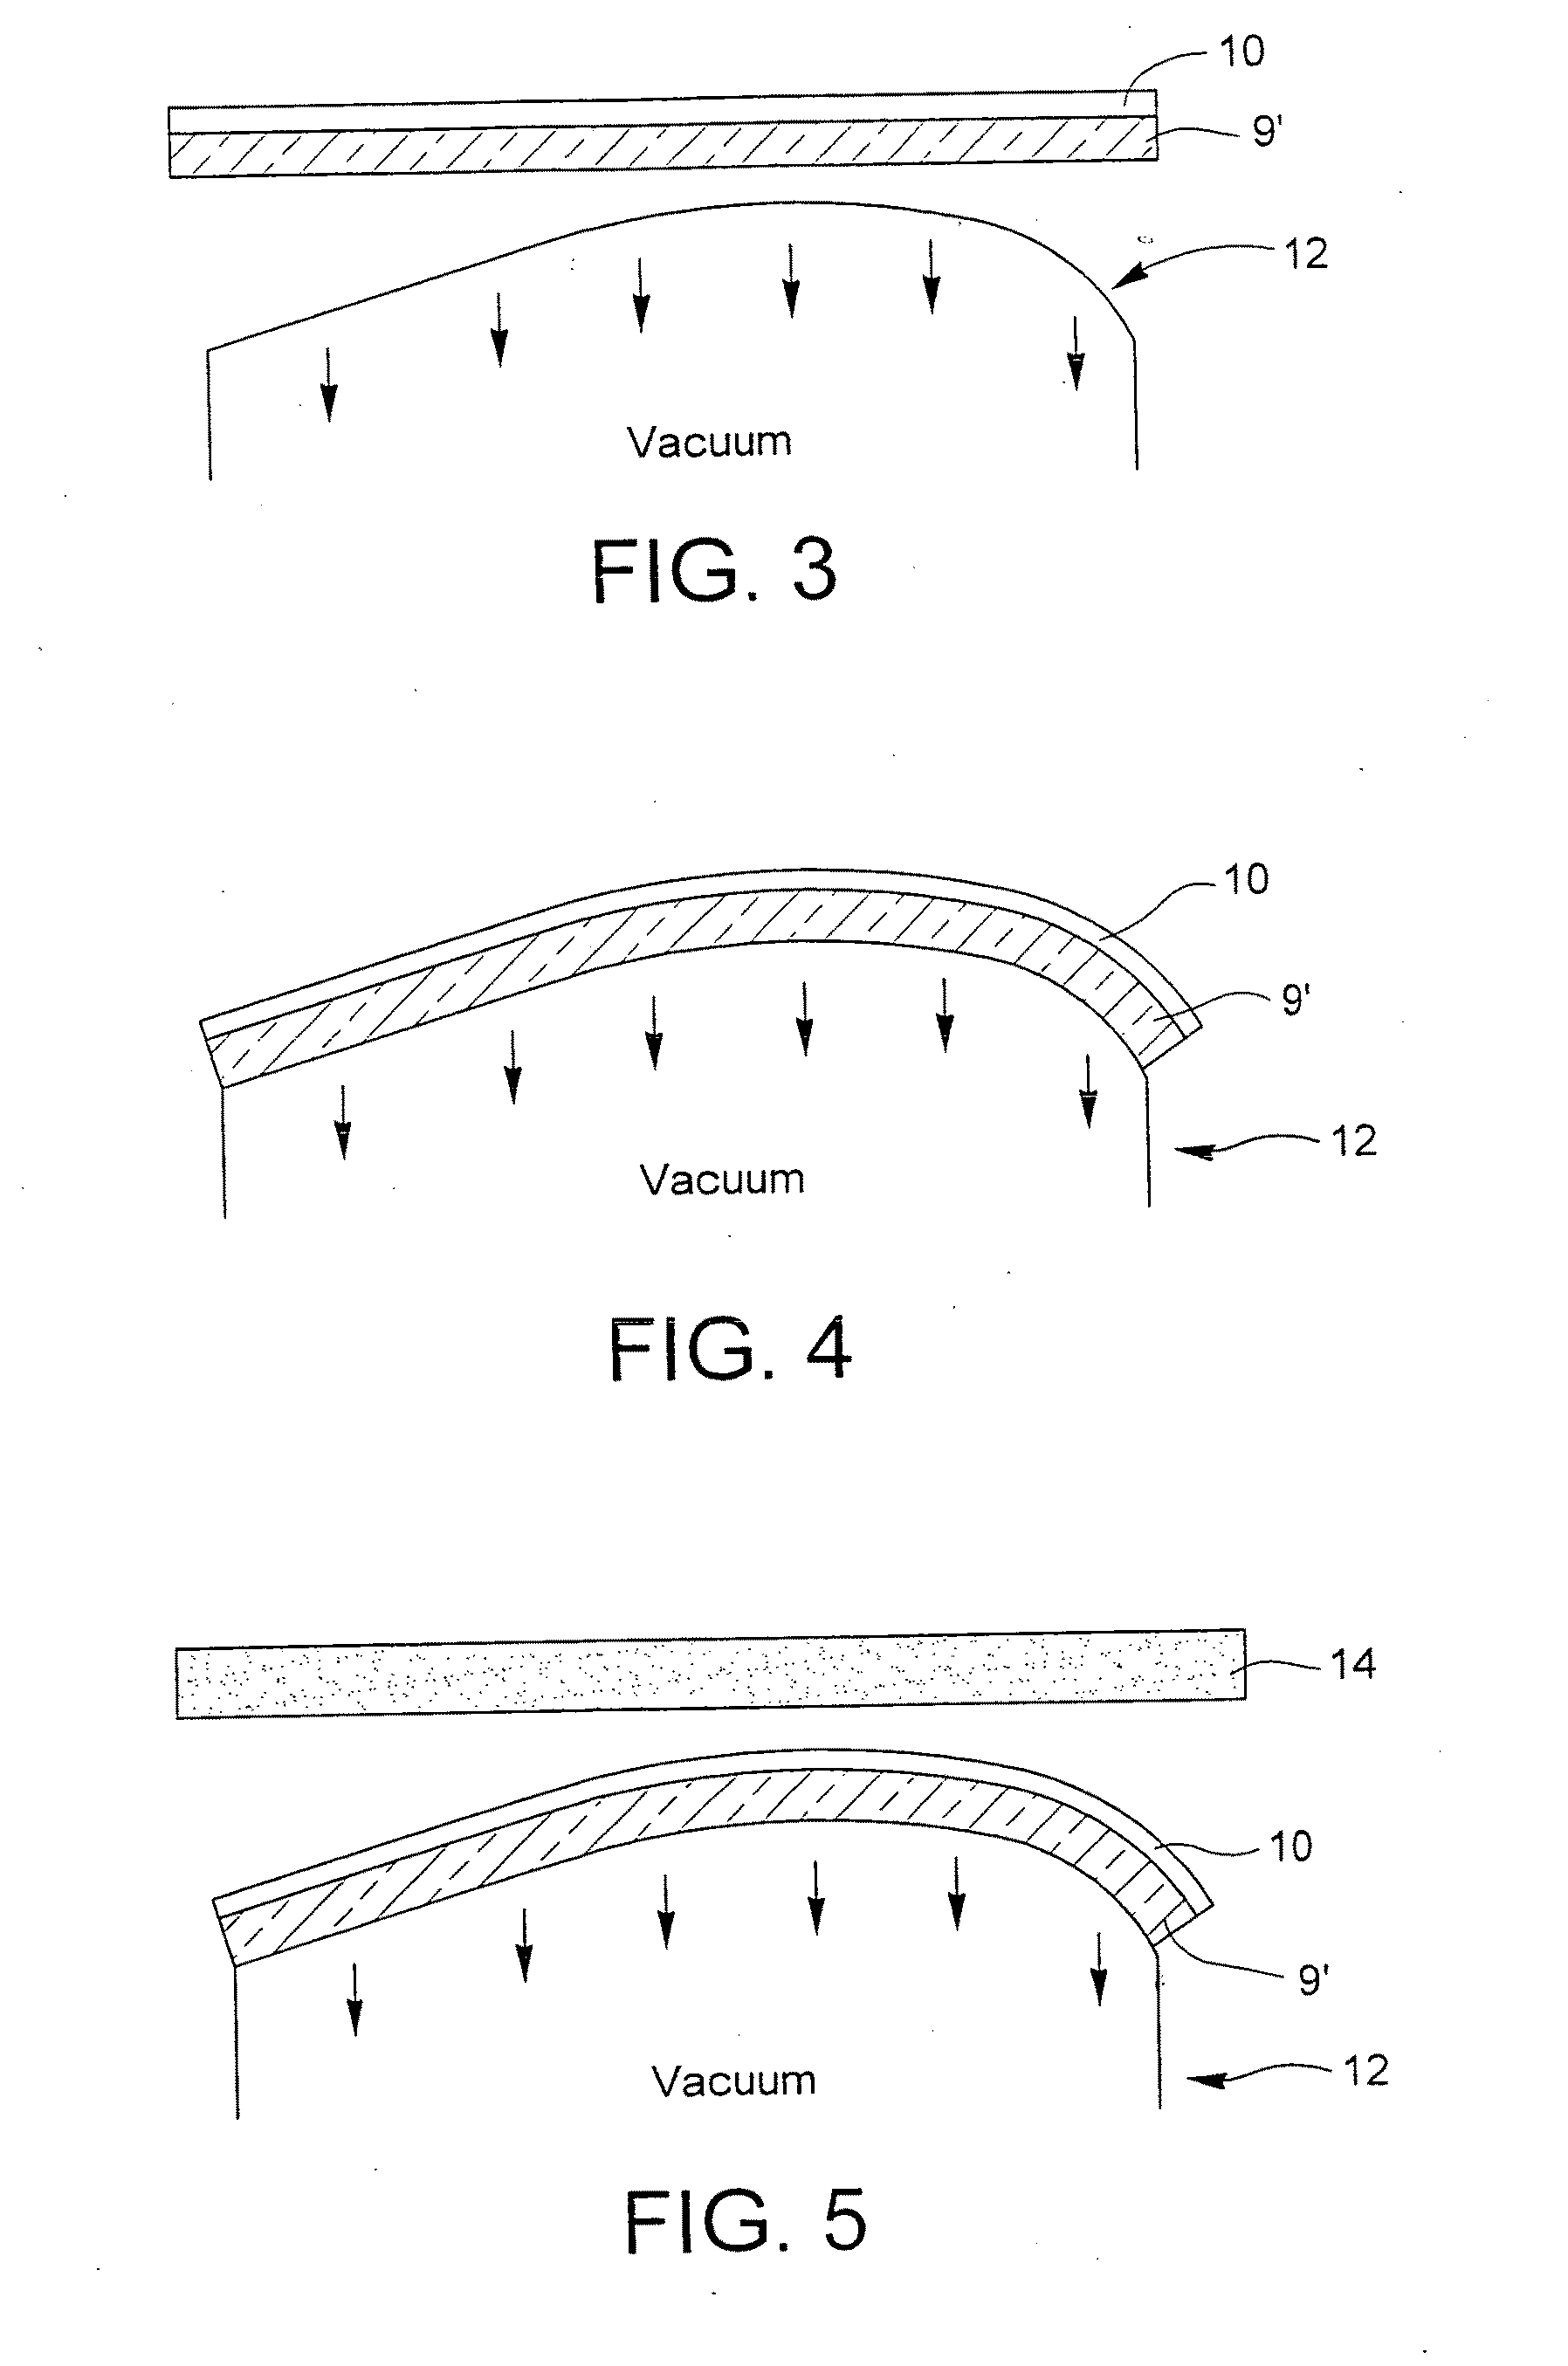 Mounting brackets for mirrors, and associated methods